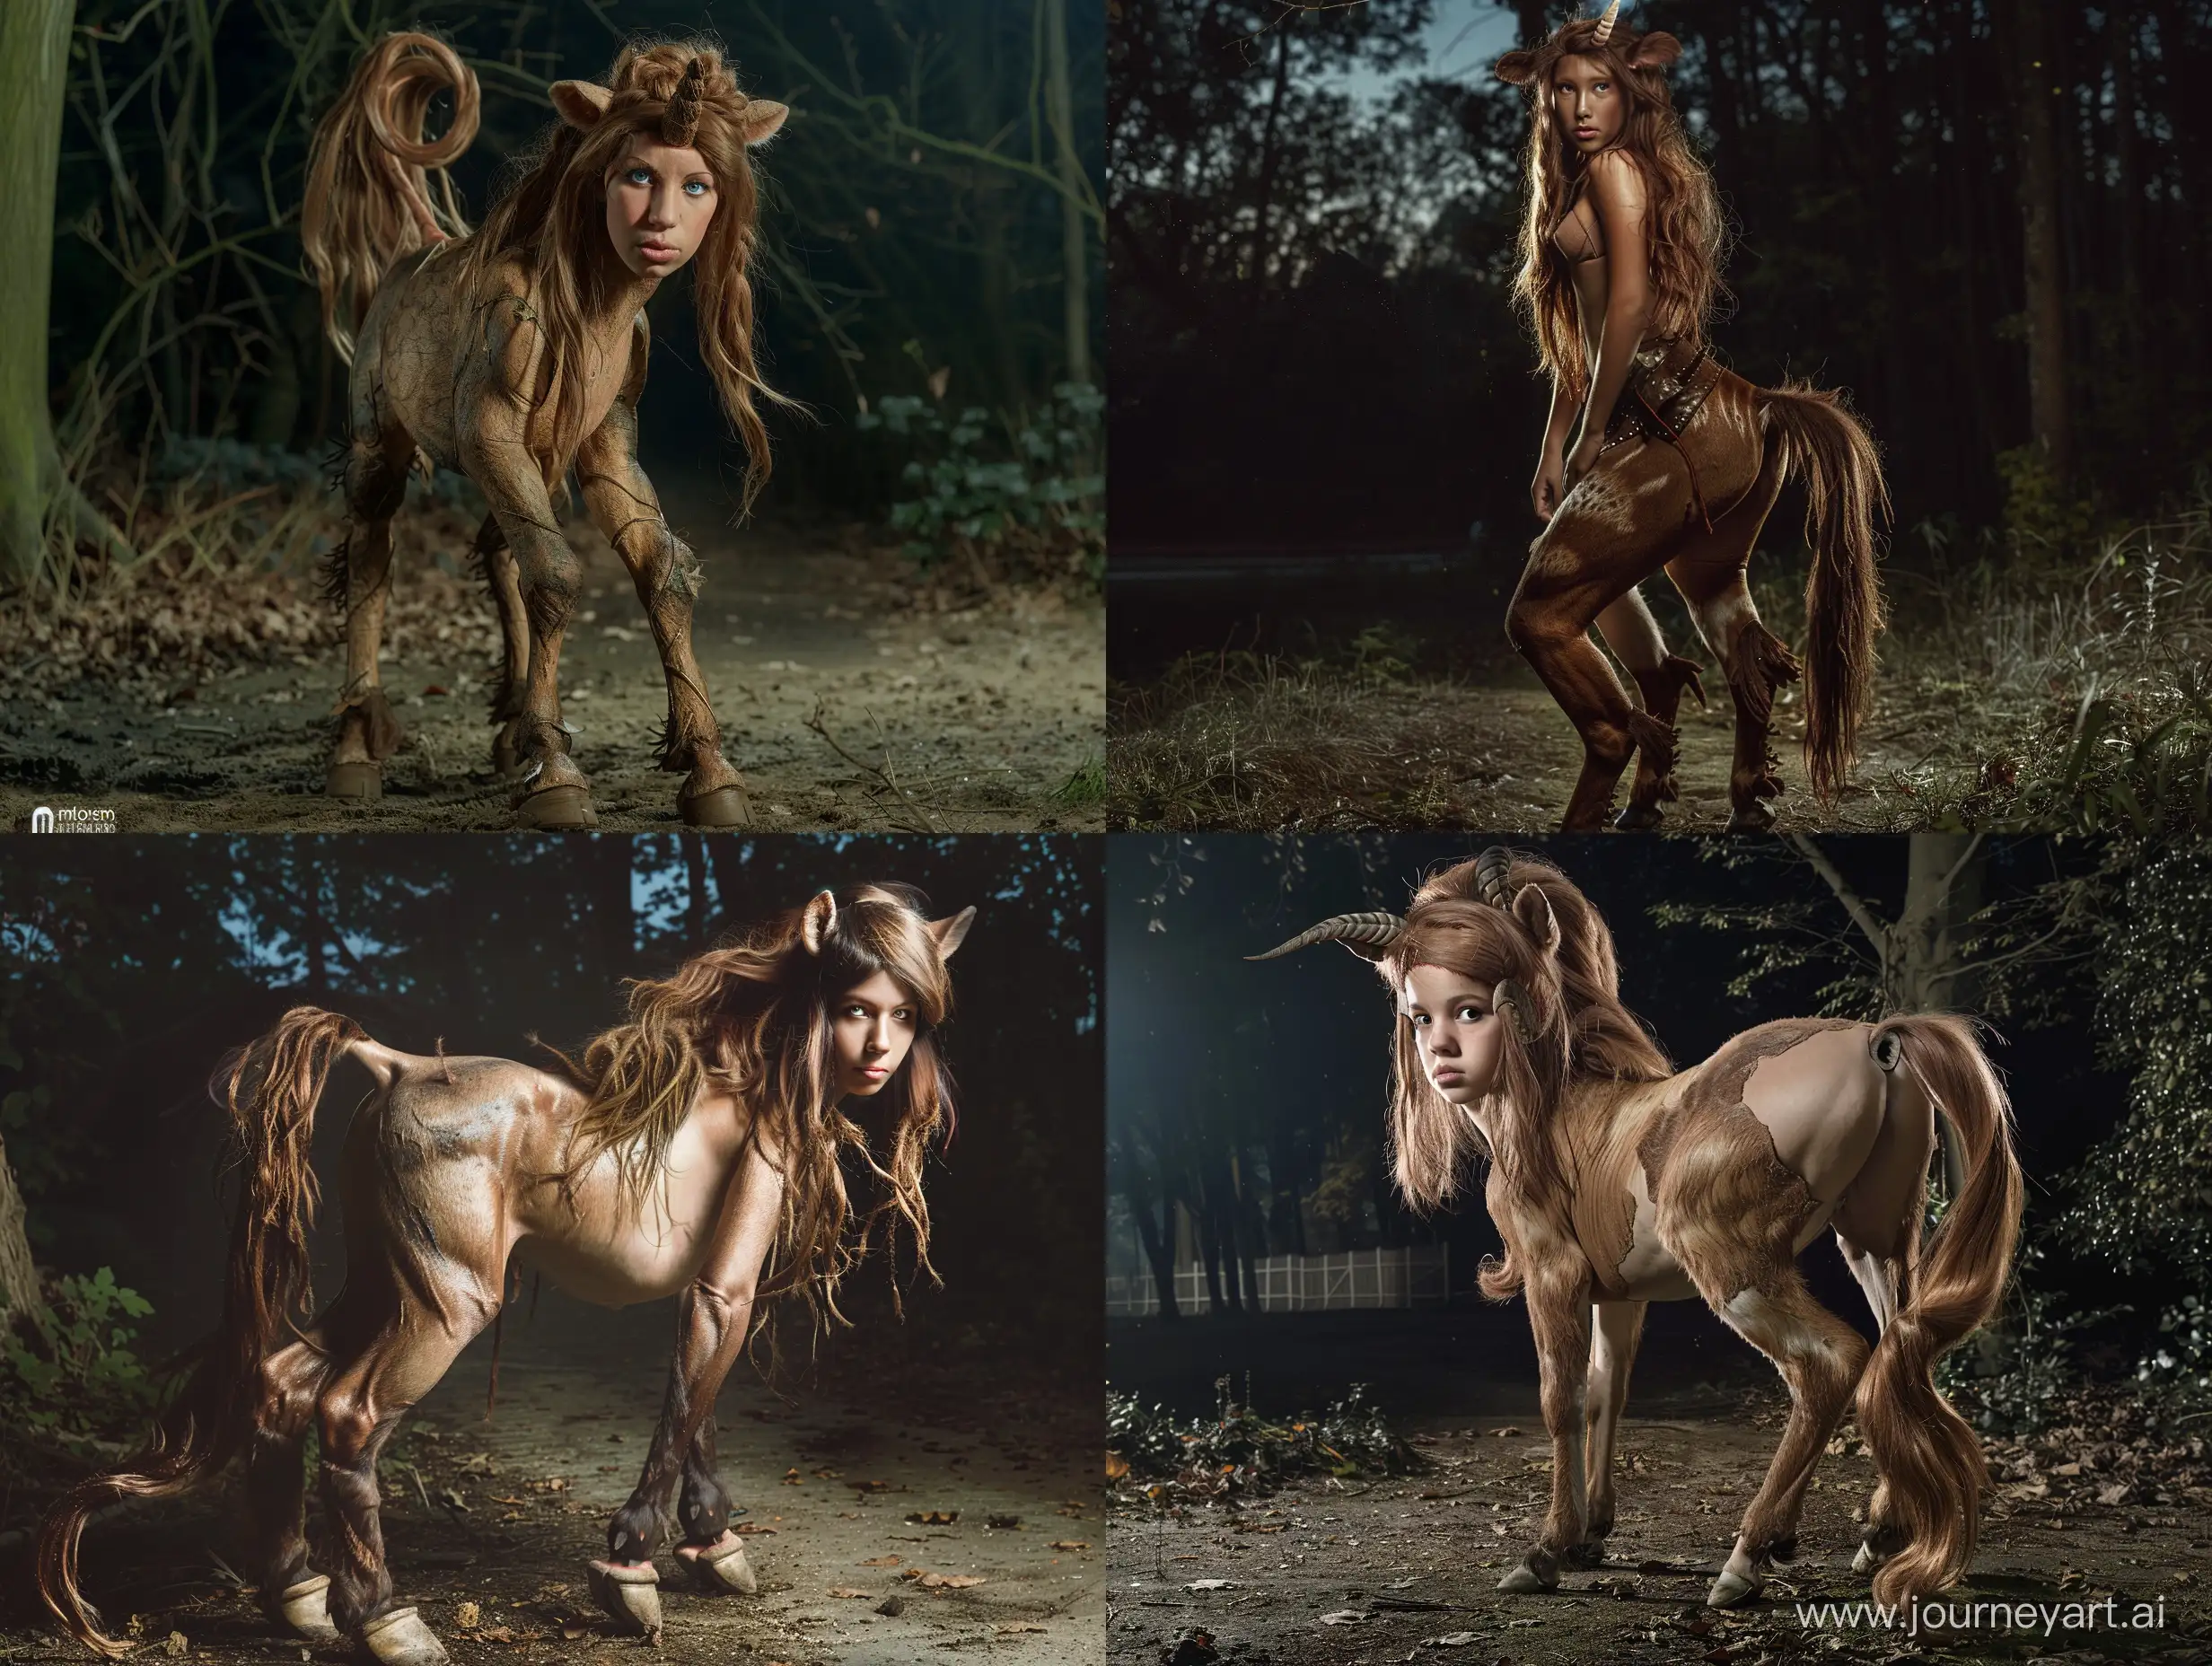 A female centaur. She has hooves and a tail. She has loose brown hair. She is standing on all fours in a forest at night. Realistic photograph, full body picture